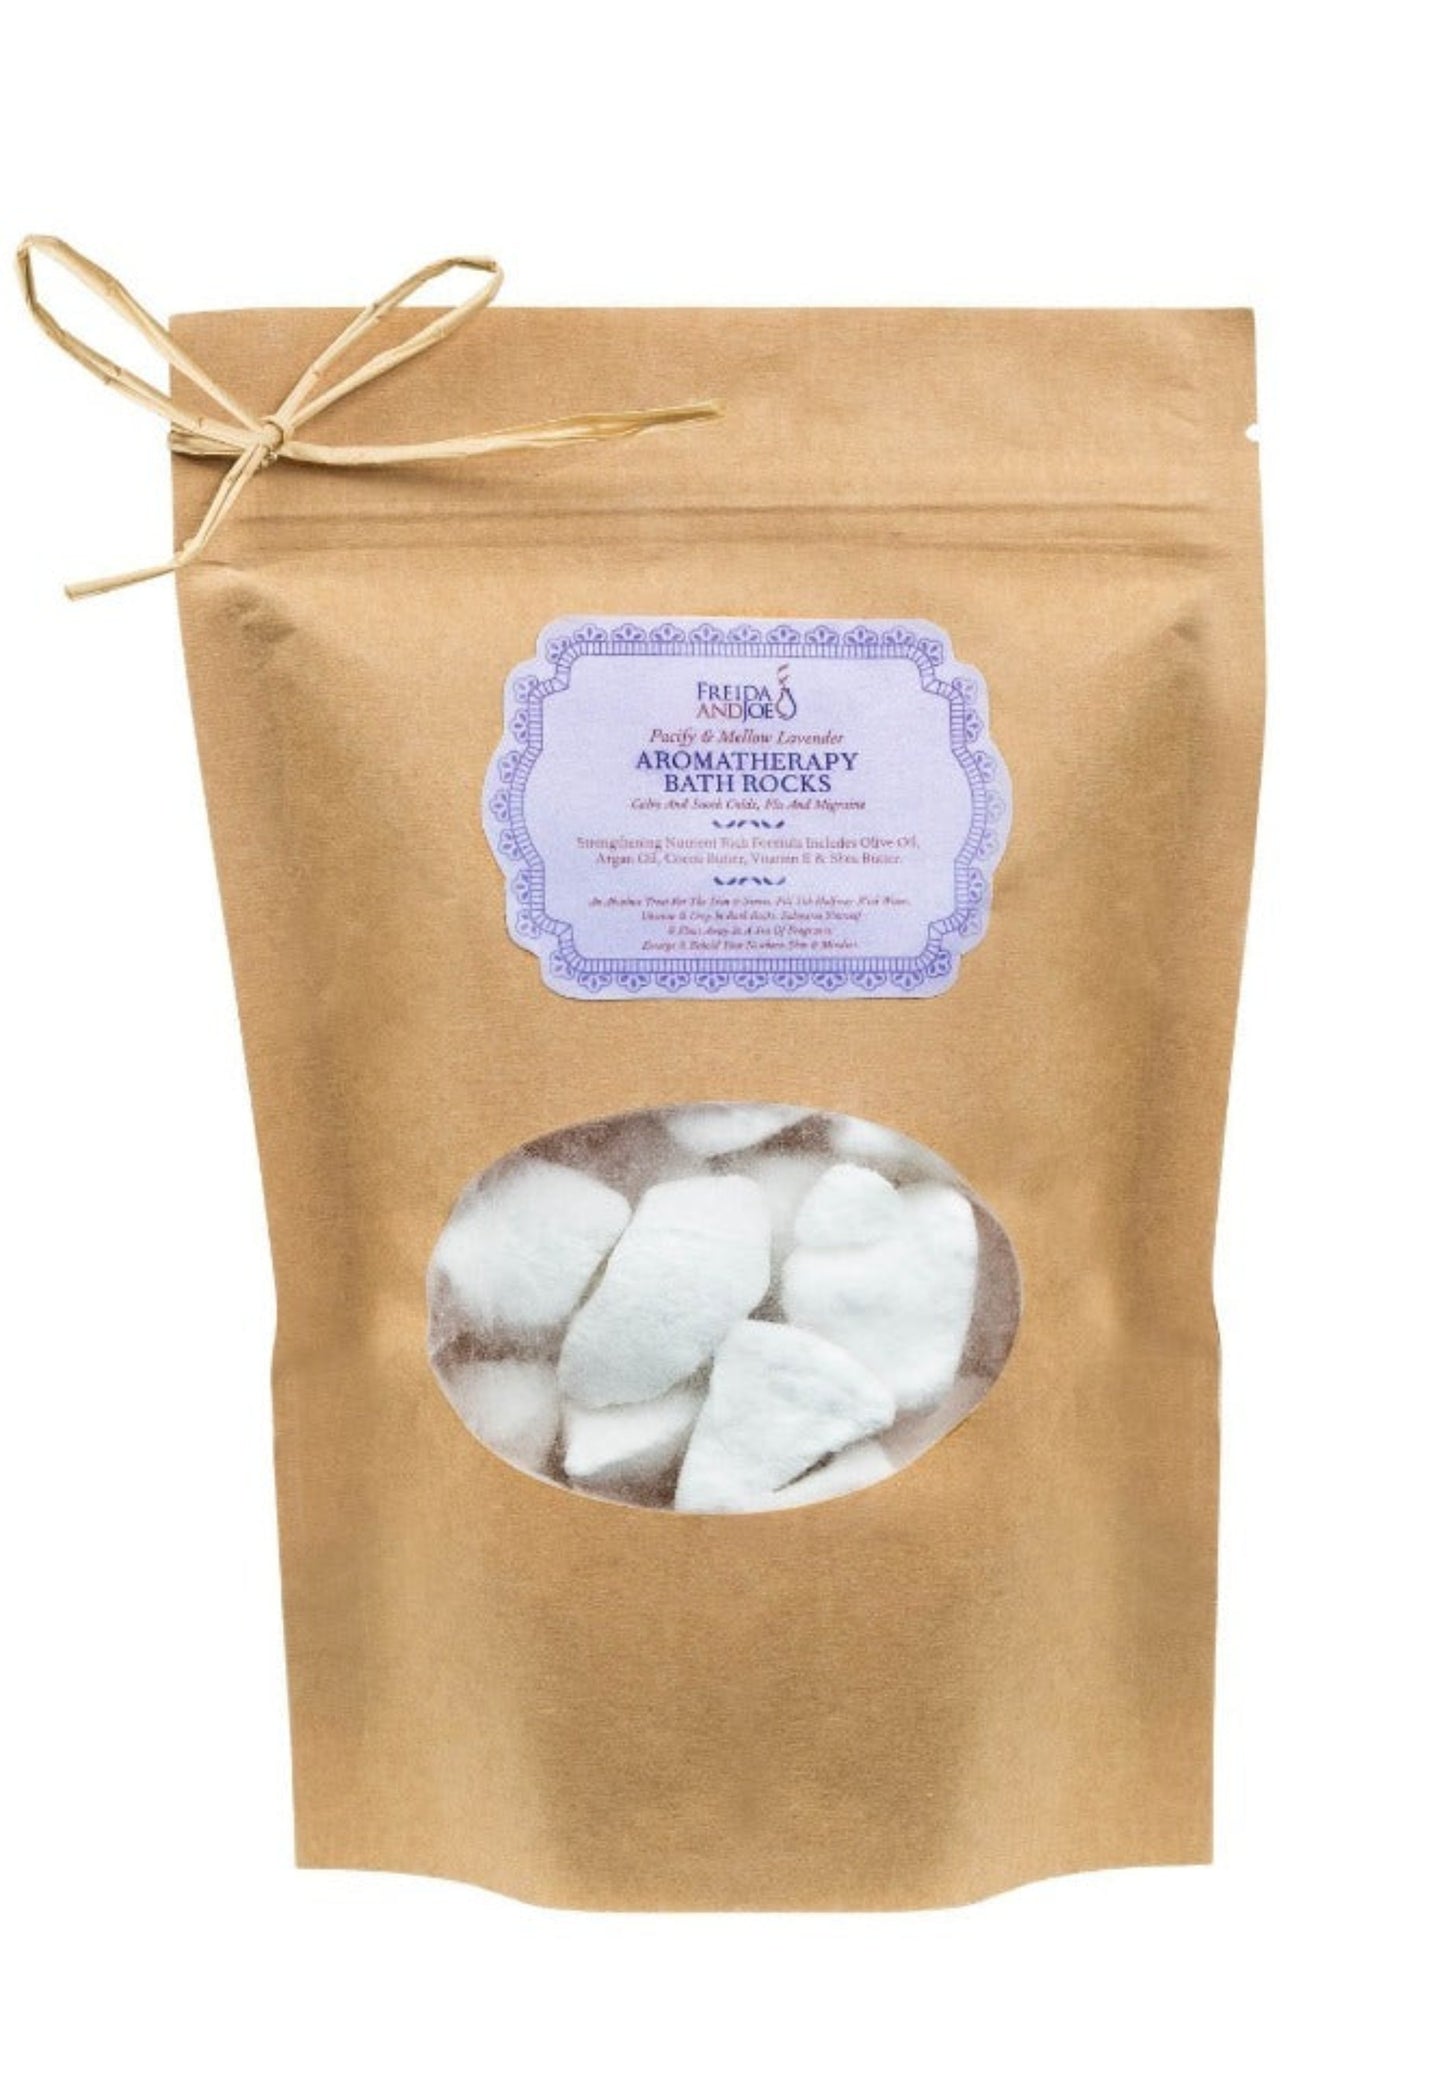 250g Aromatherapy Lavender Bath Rocks - Enriched with Essential Oils, Vitamin E & Shea Butter